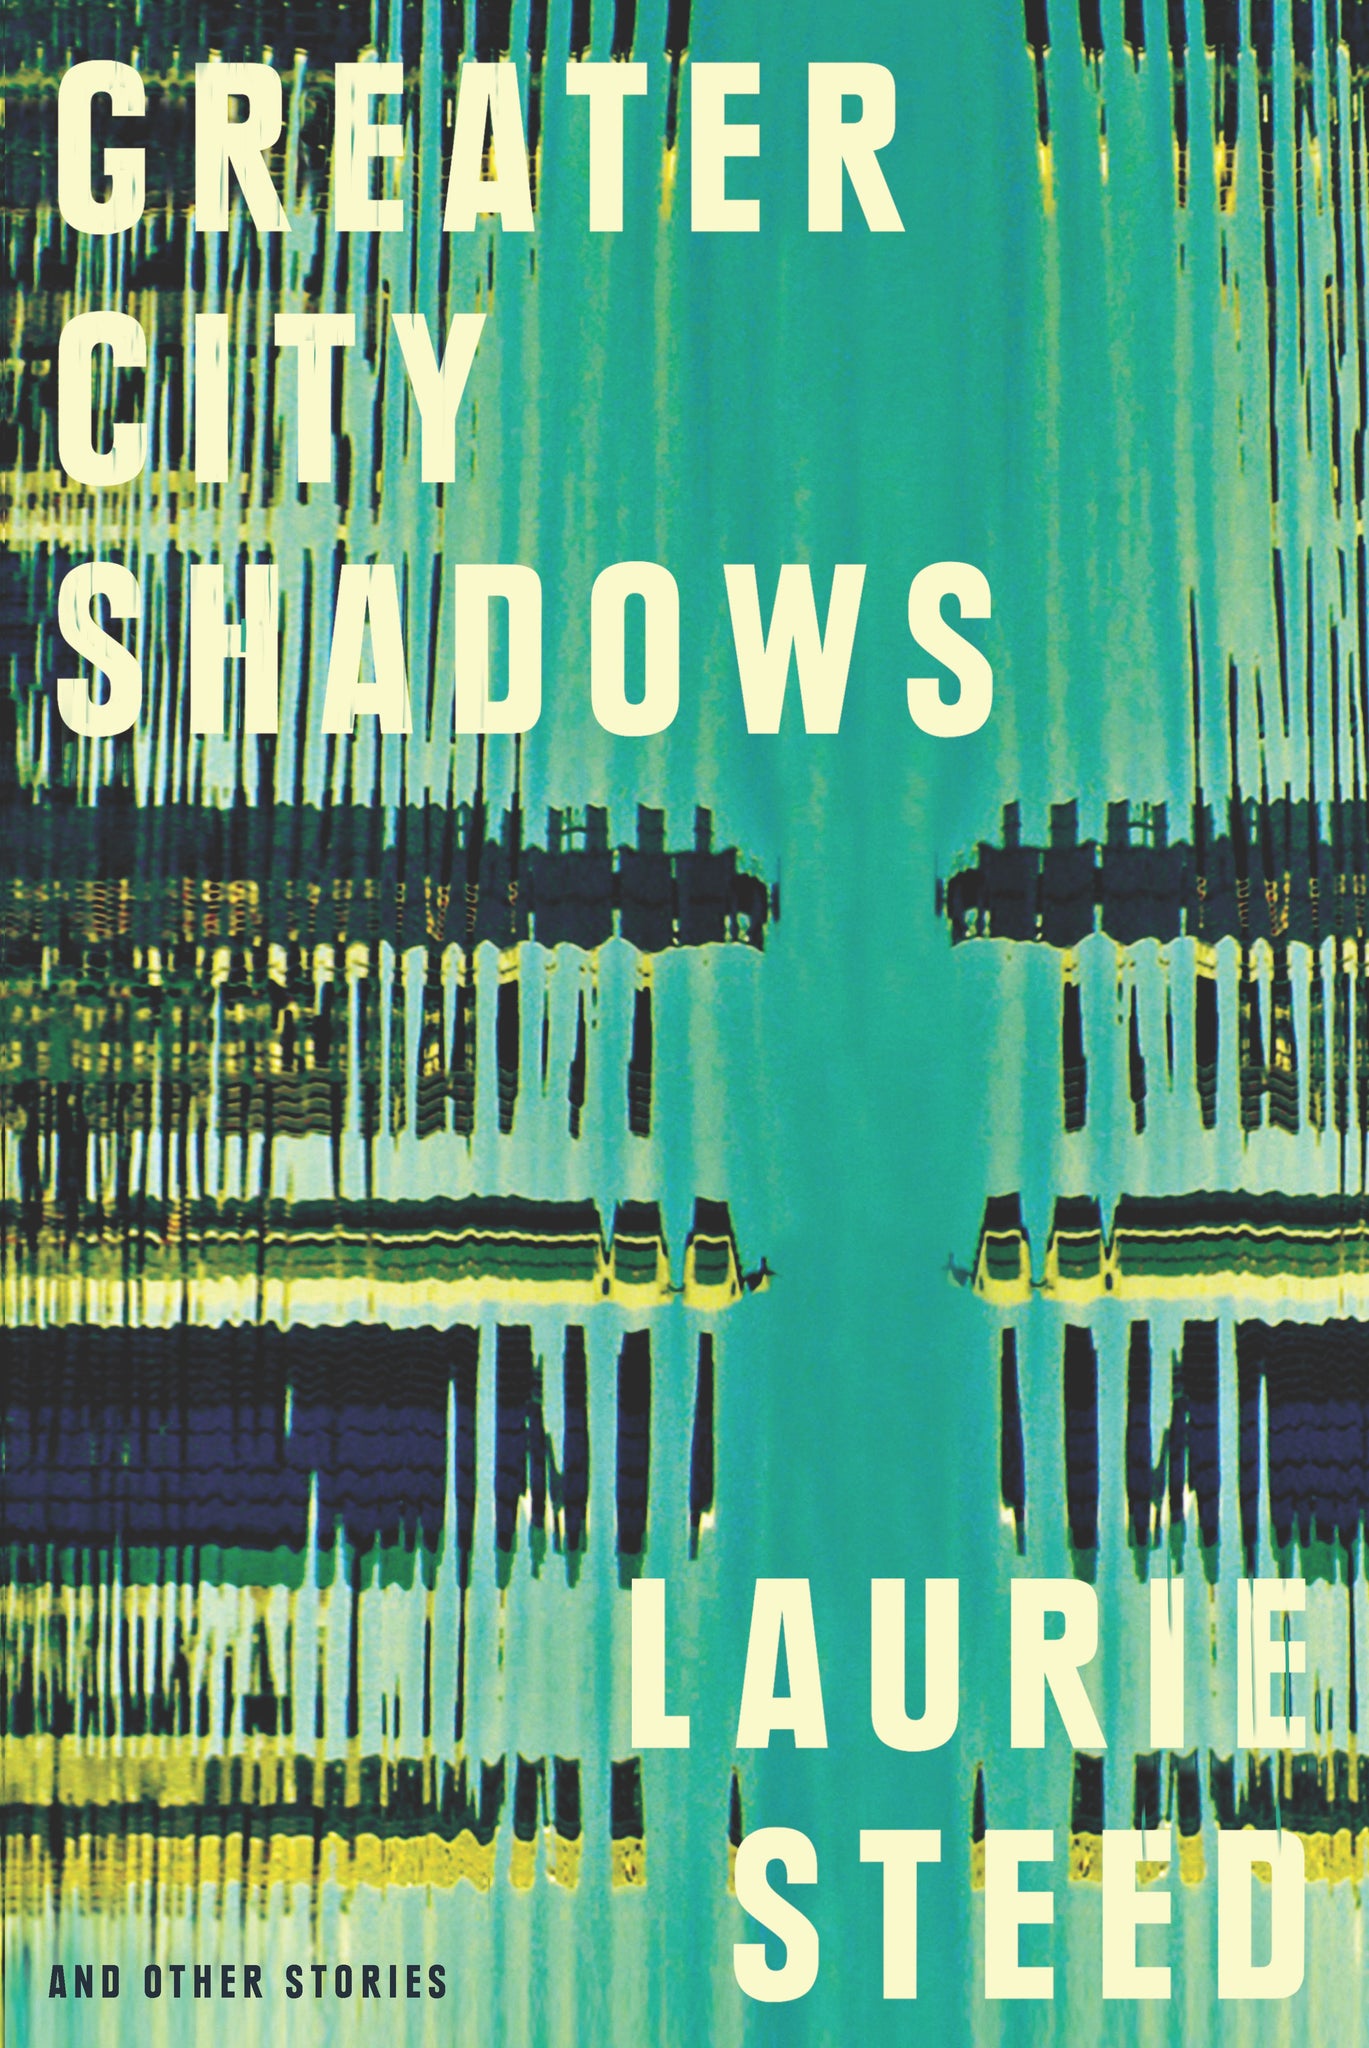 Greater City Shadows